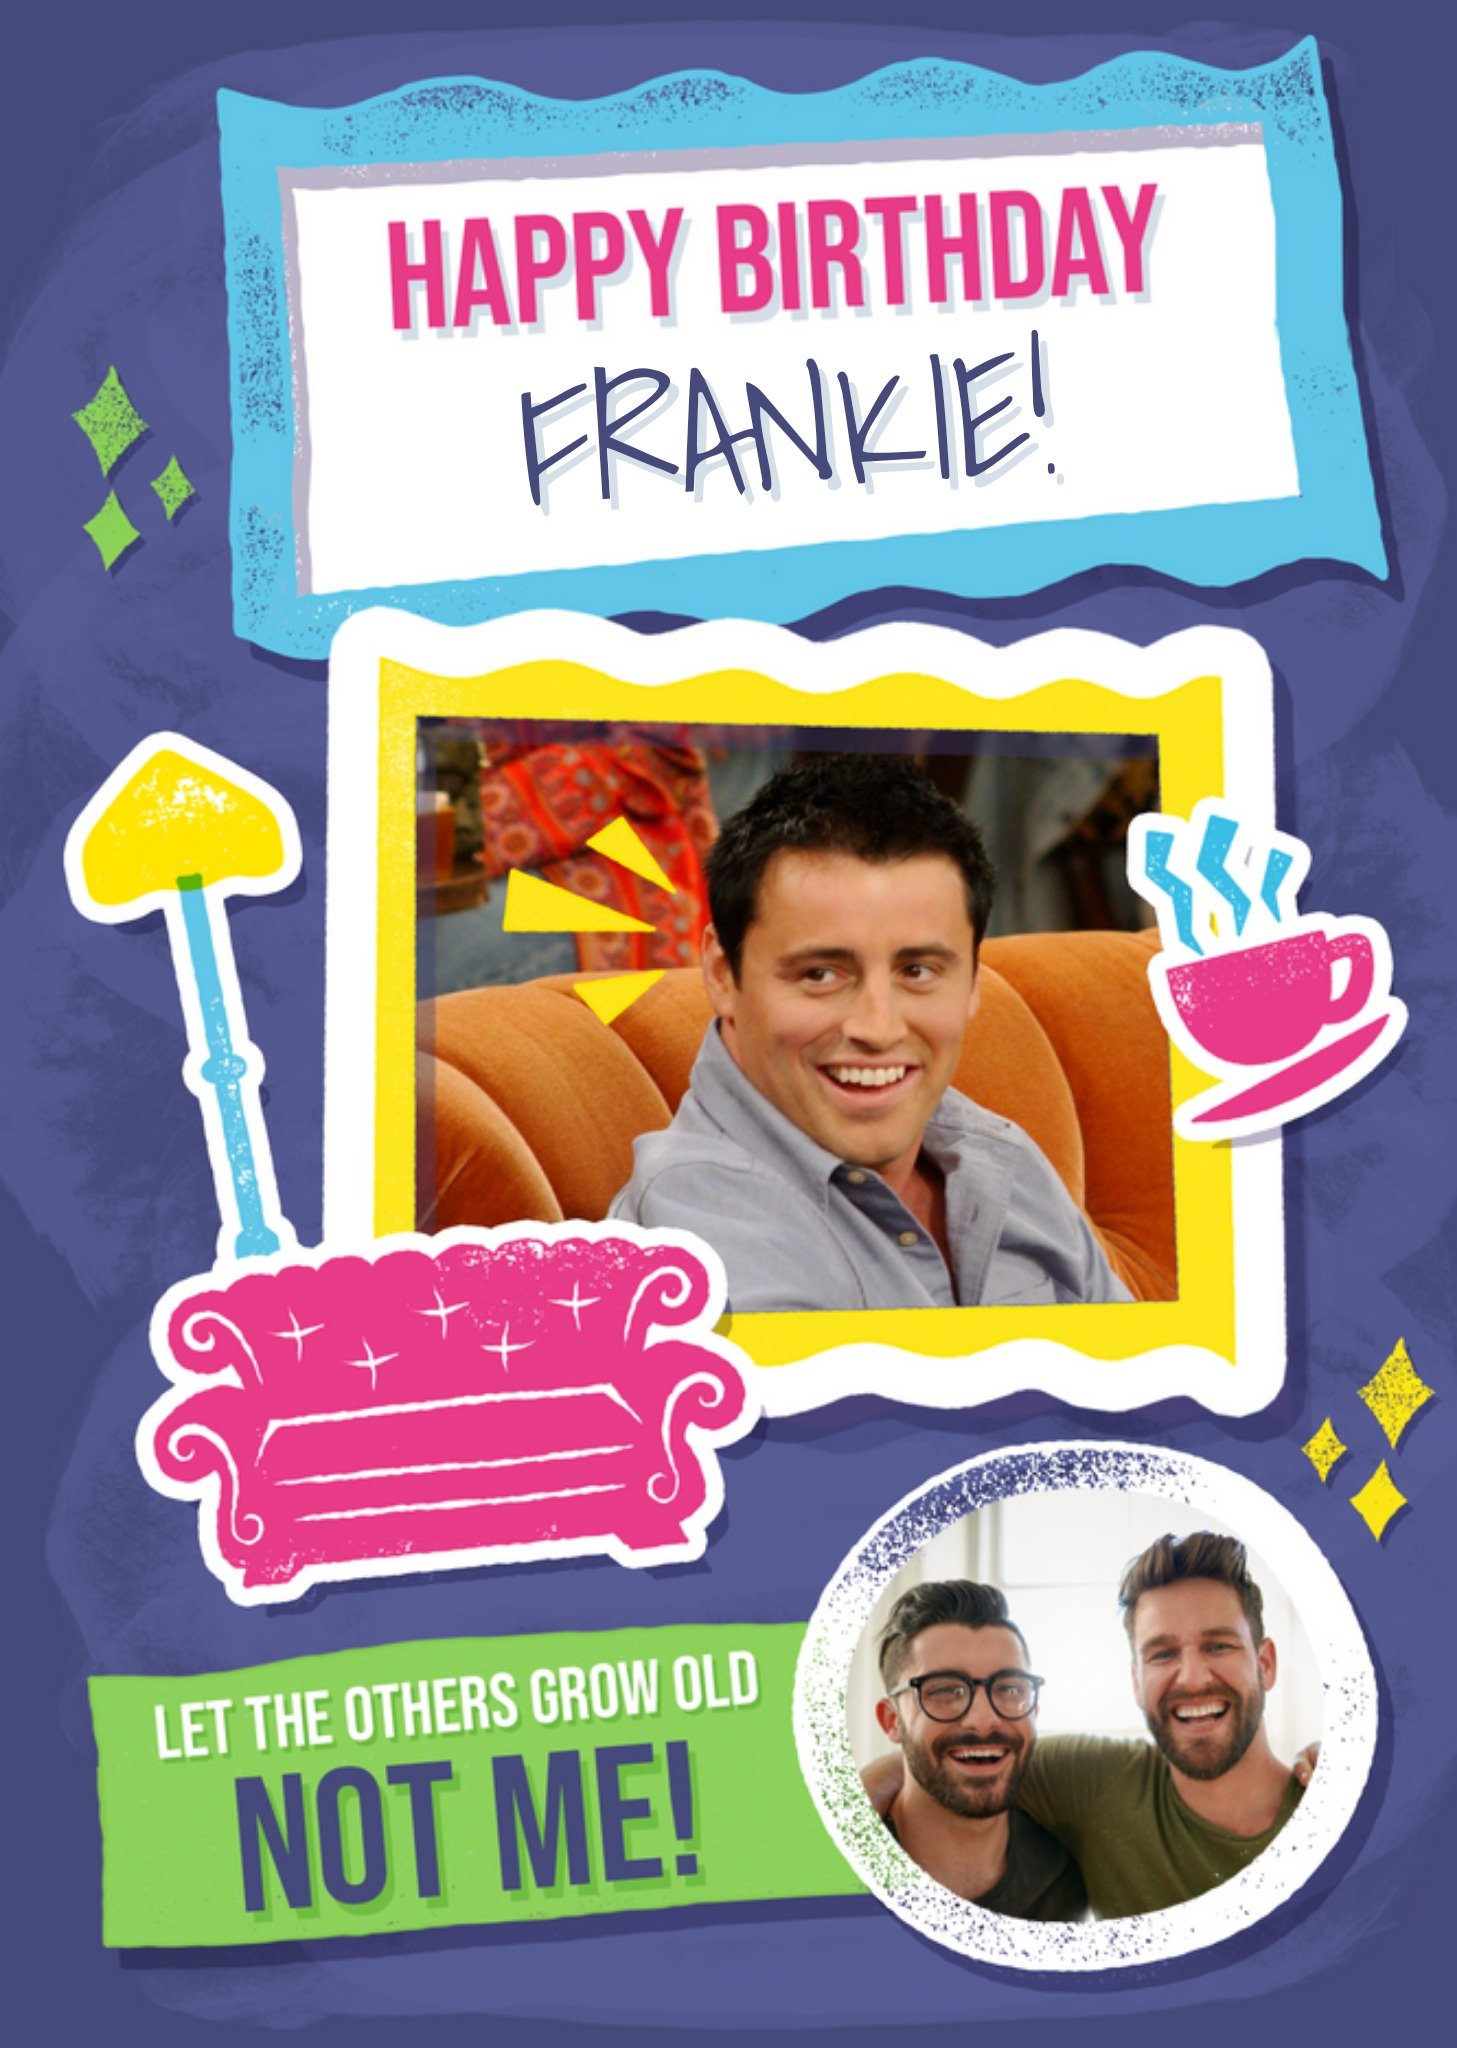 Friends (Tv Show) Let The Others Grow Old Funny Joey Quote Friends Photo Upload Birthday Card Ecard